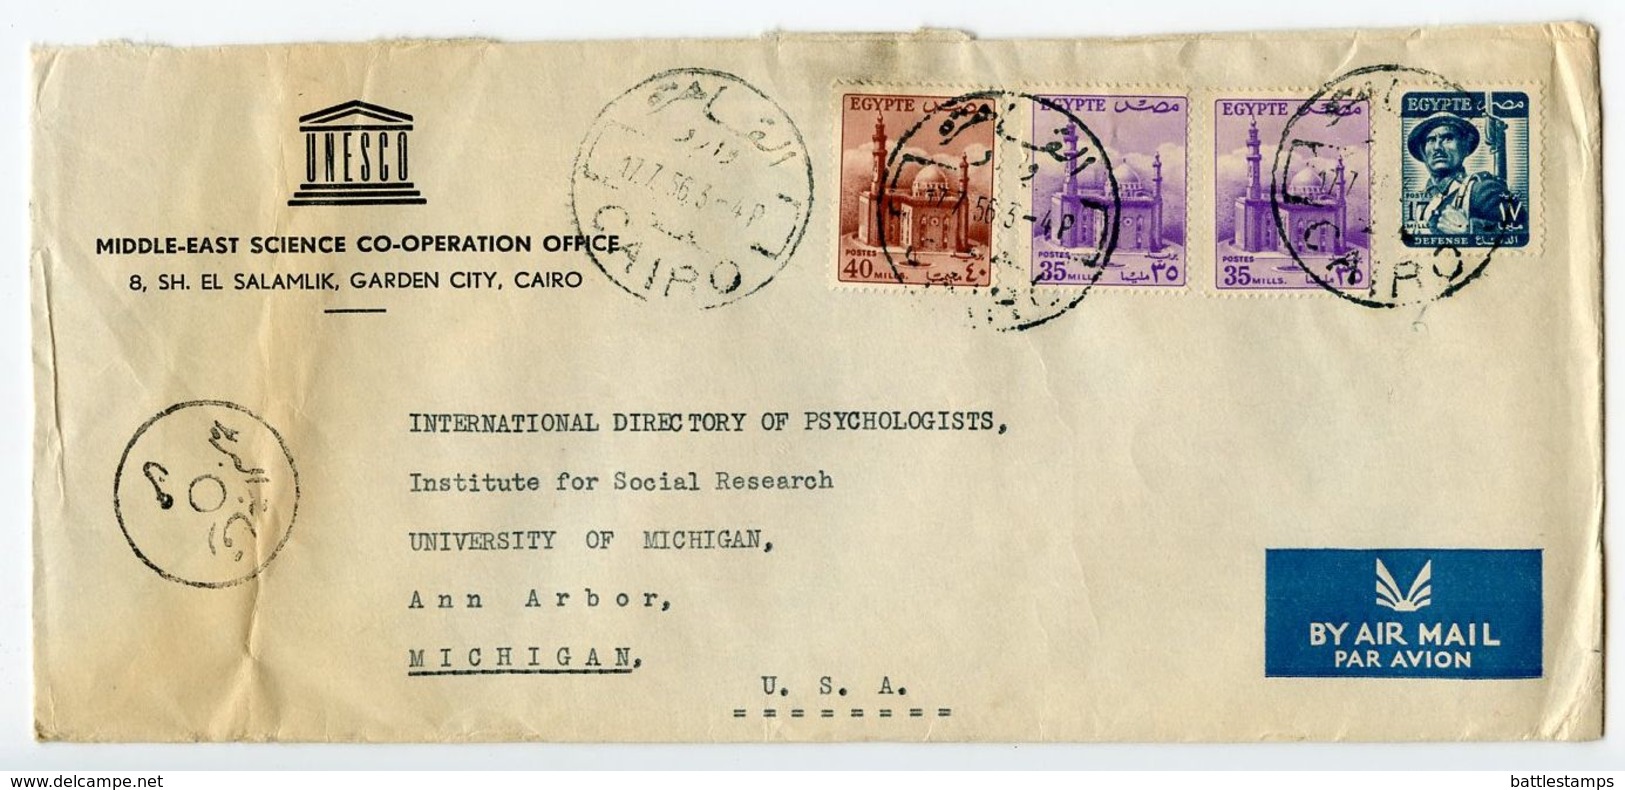 Egypt 1956 Airmail Cover Cairo - UNESCO Middle-East Science Co-Operation Office - Covers & Documents